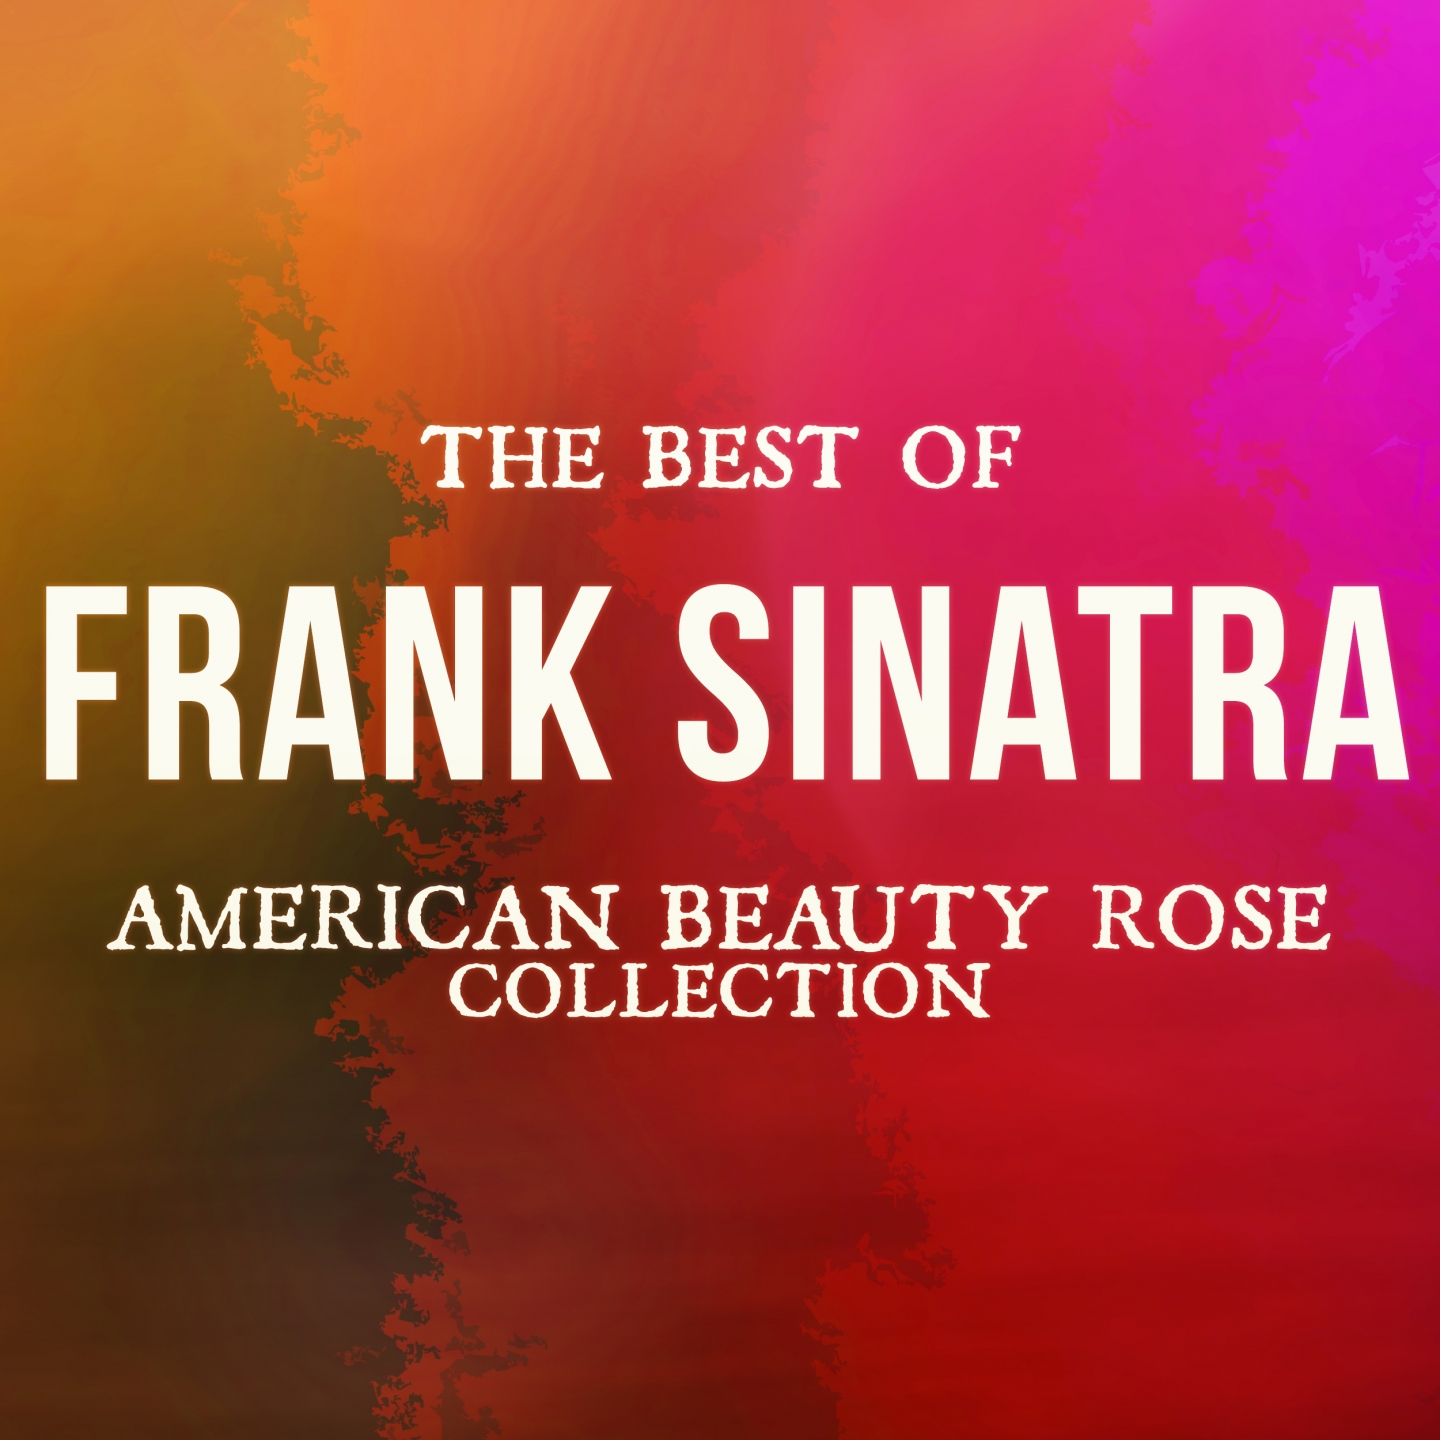 The Best of Frank Sinatra (American Beauty Rose Collection)